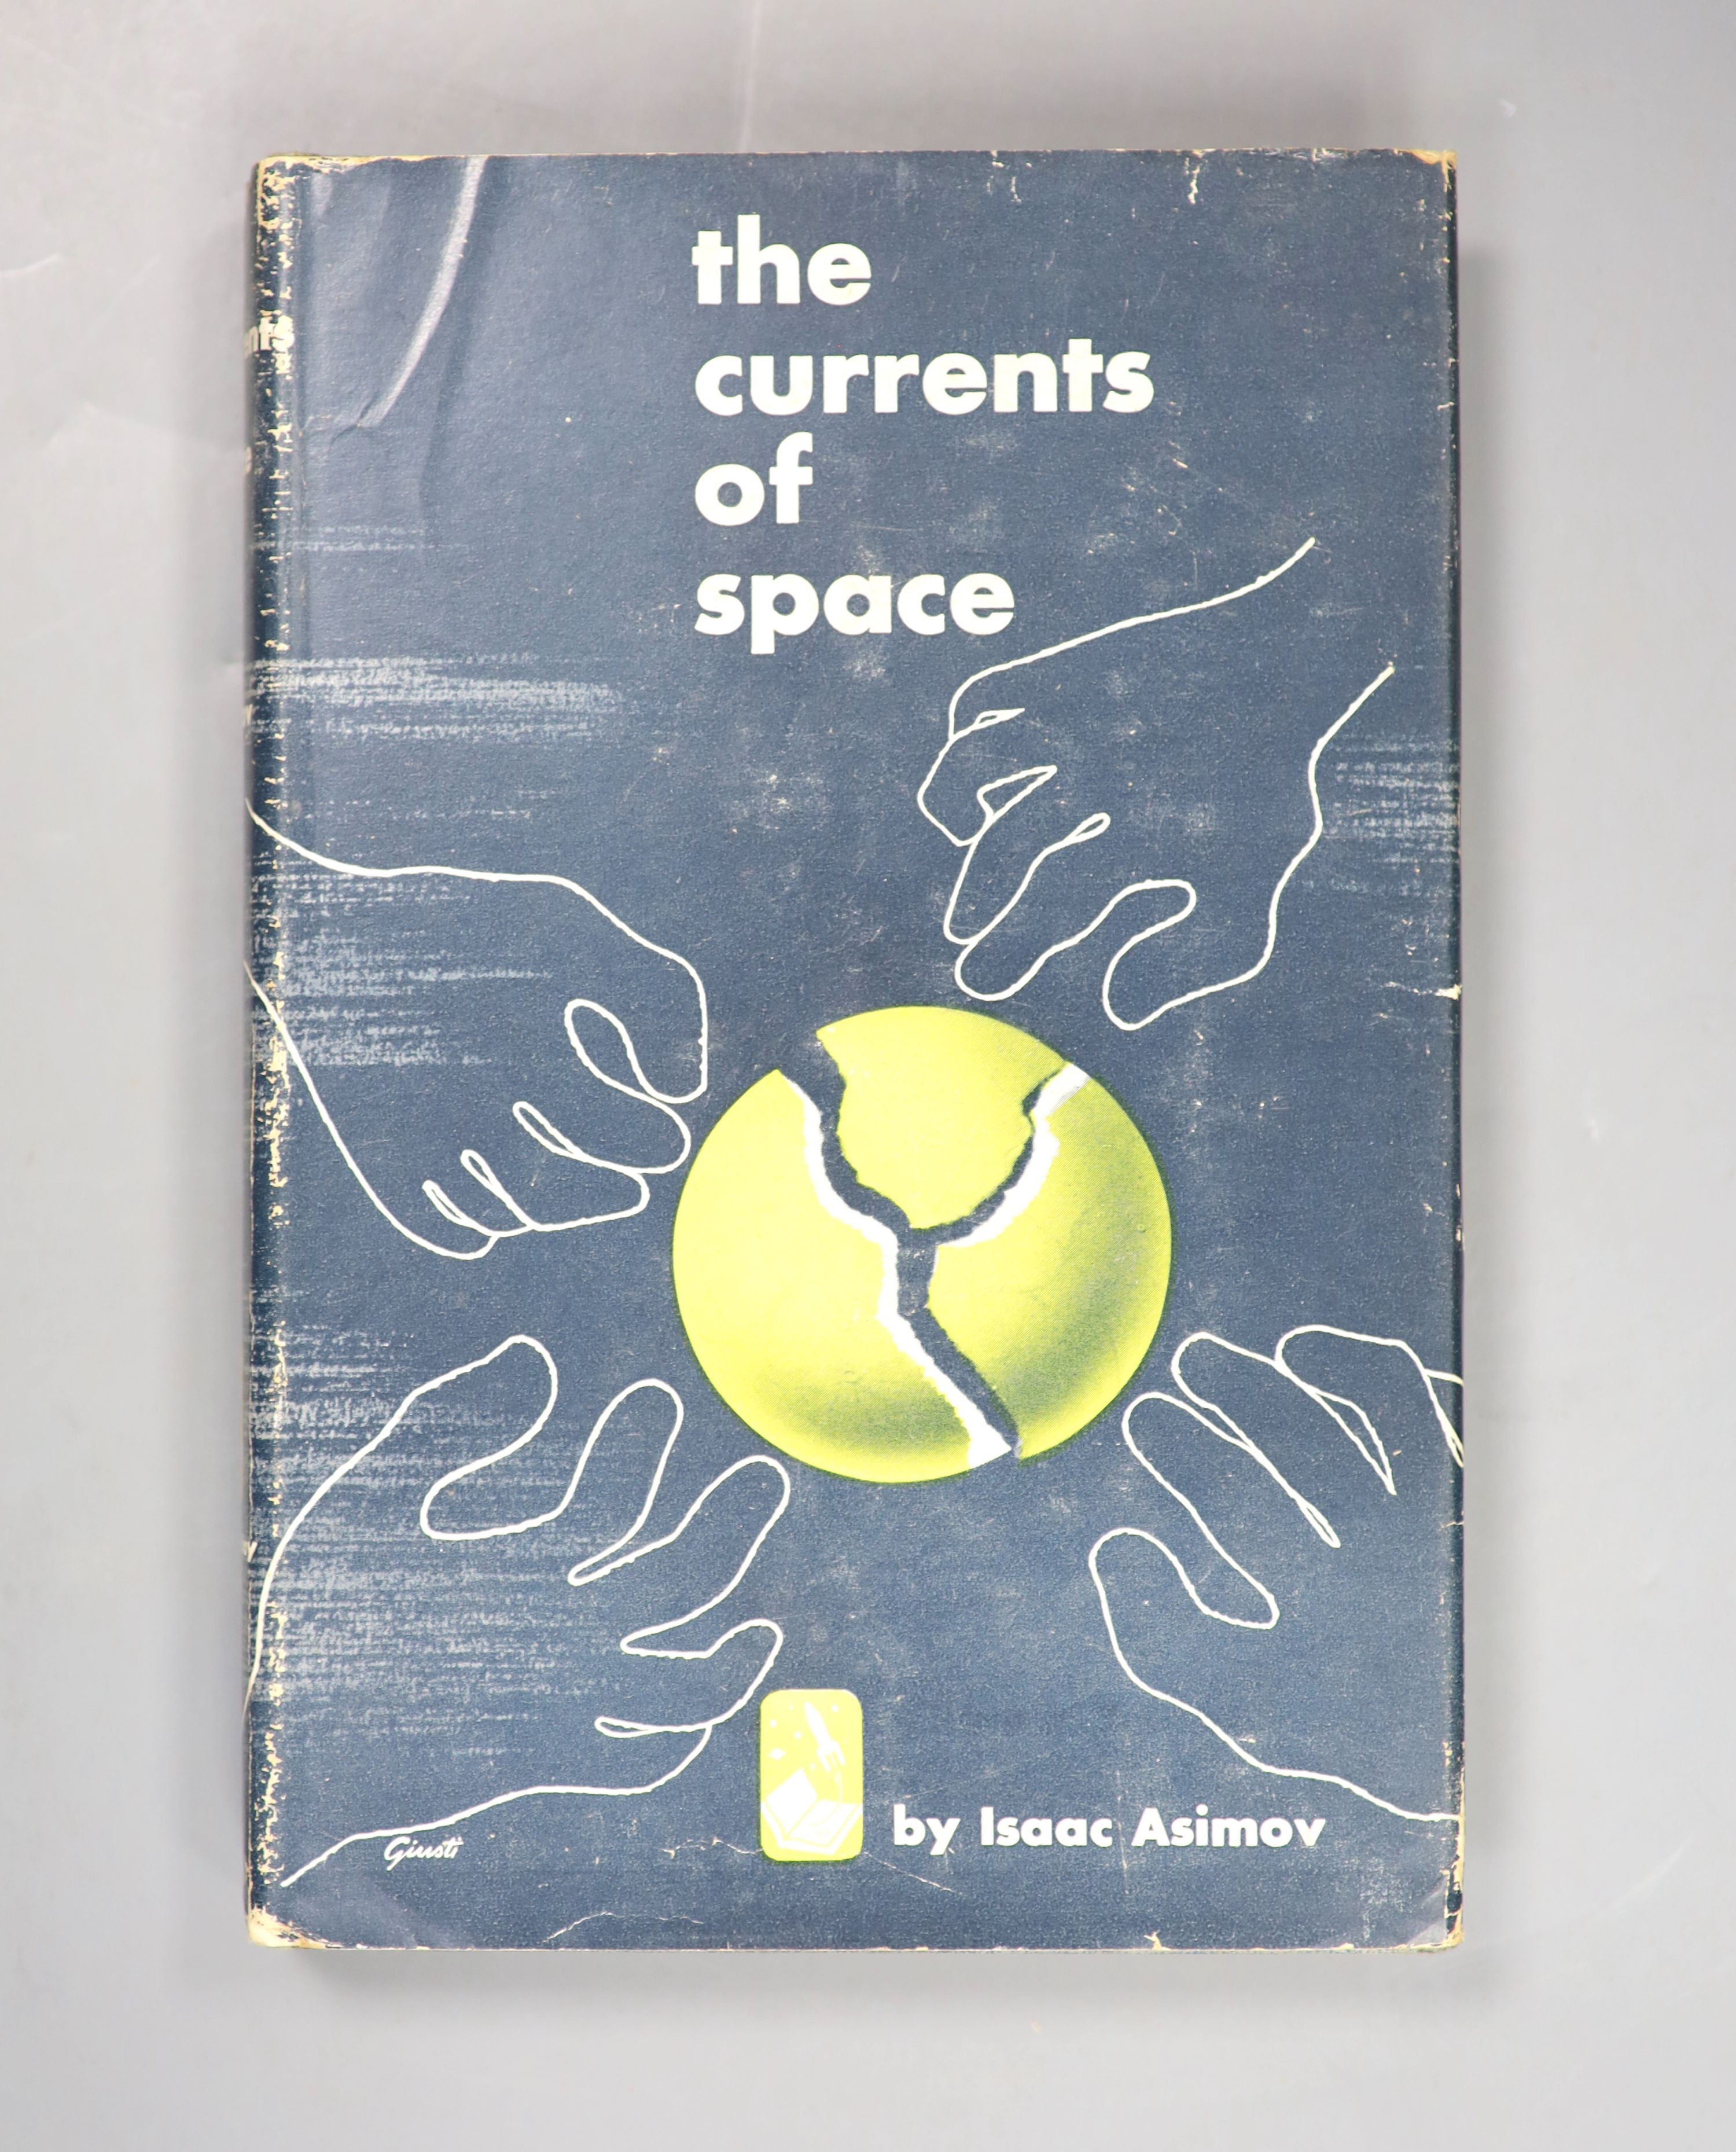 Asimov, Isaac - The Foundation Trilogy, all 1st editions, all in unclipped d/j’, all Gnome Press, New York - Foundation, 1951; Foundation and Empire, 1952; Second Foundation, 1953, with , The Stars Like Dust, 1st edition